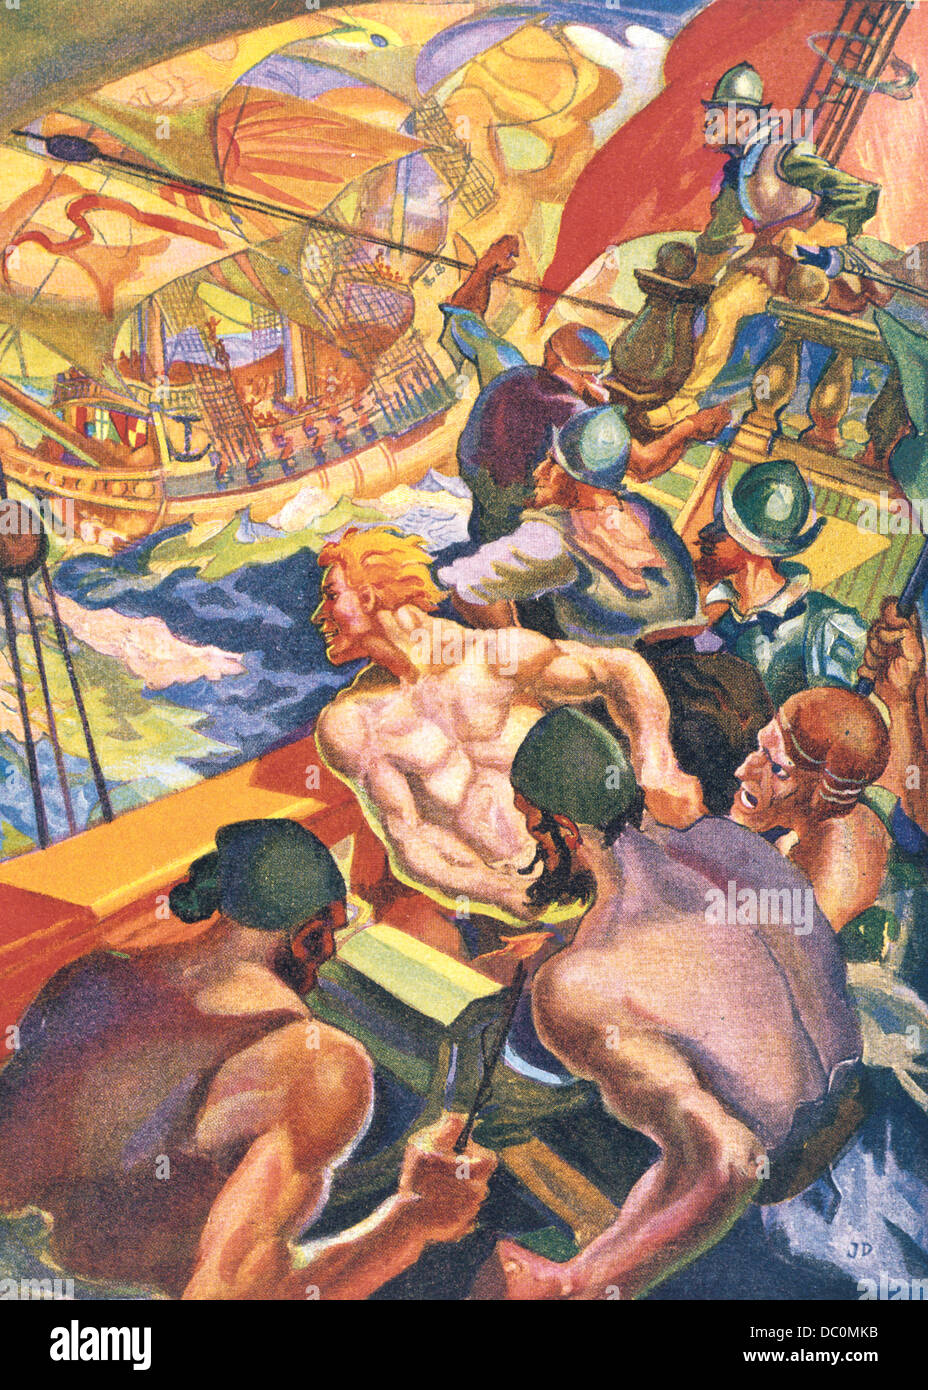 JAMES DAUGHERTY PAINTING SIR FRANCIS DRAKE'S QUEST SHOWS SAILORS OF THE 1500s IN BATTLE AT SEA Stock Photo